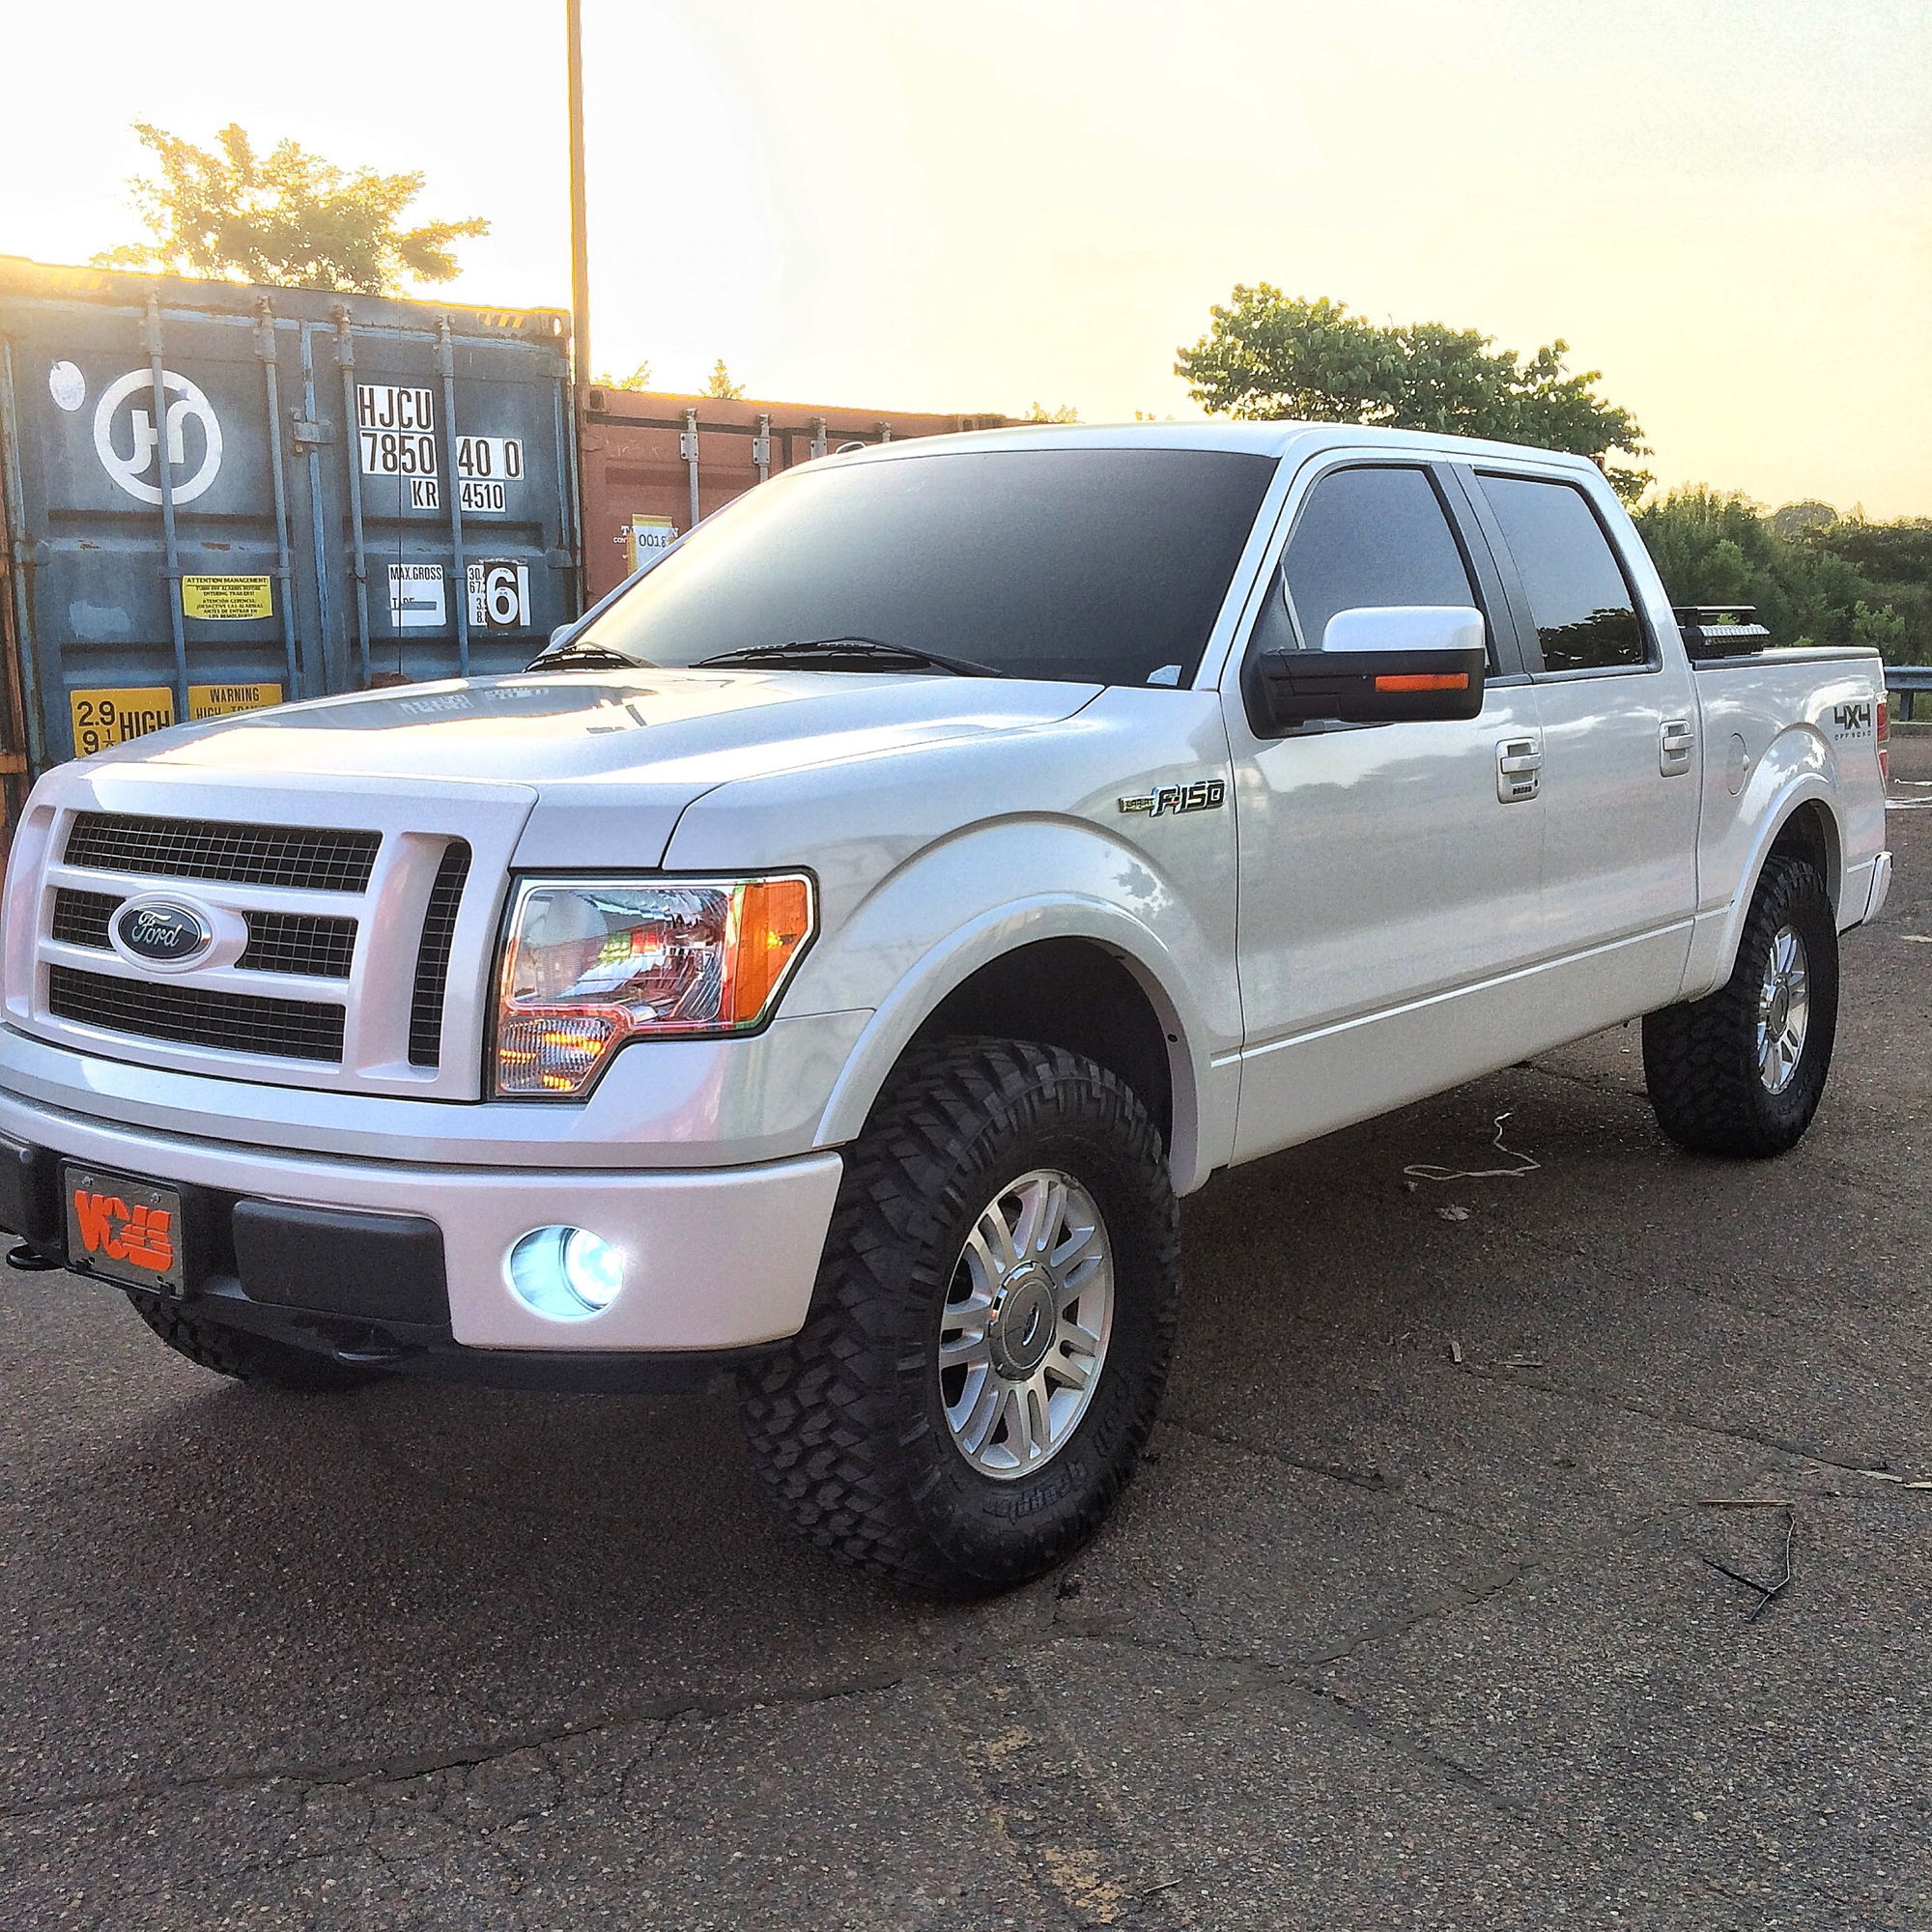 Color Match F150 - Ford F150 Forum - Community of Ford Truck Fans